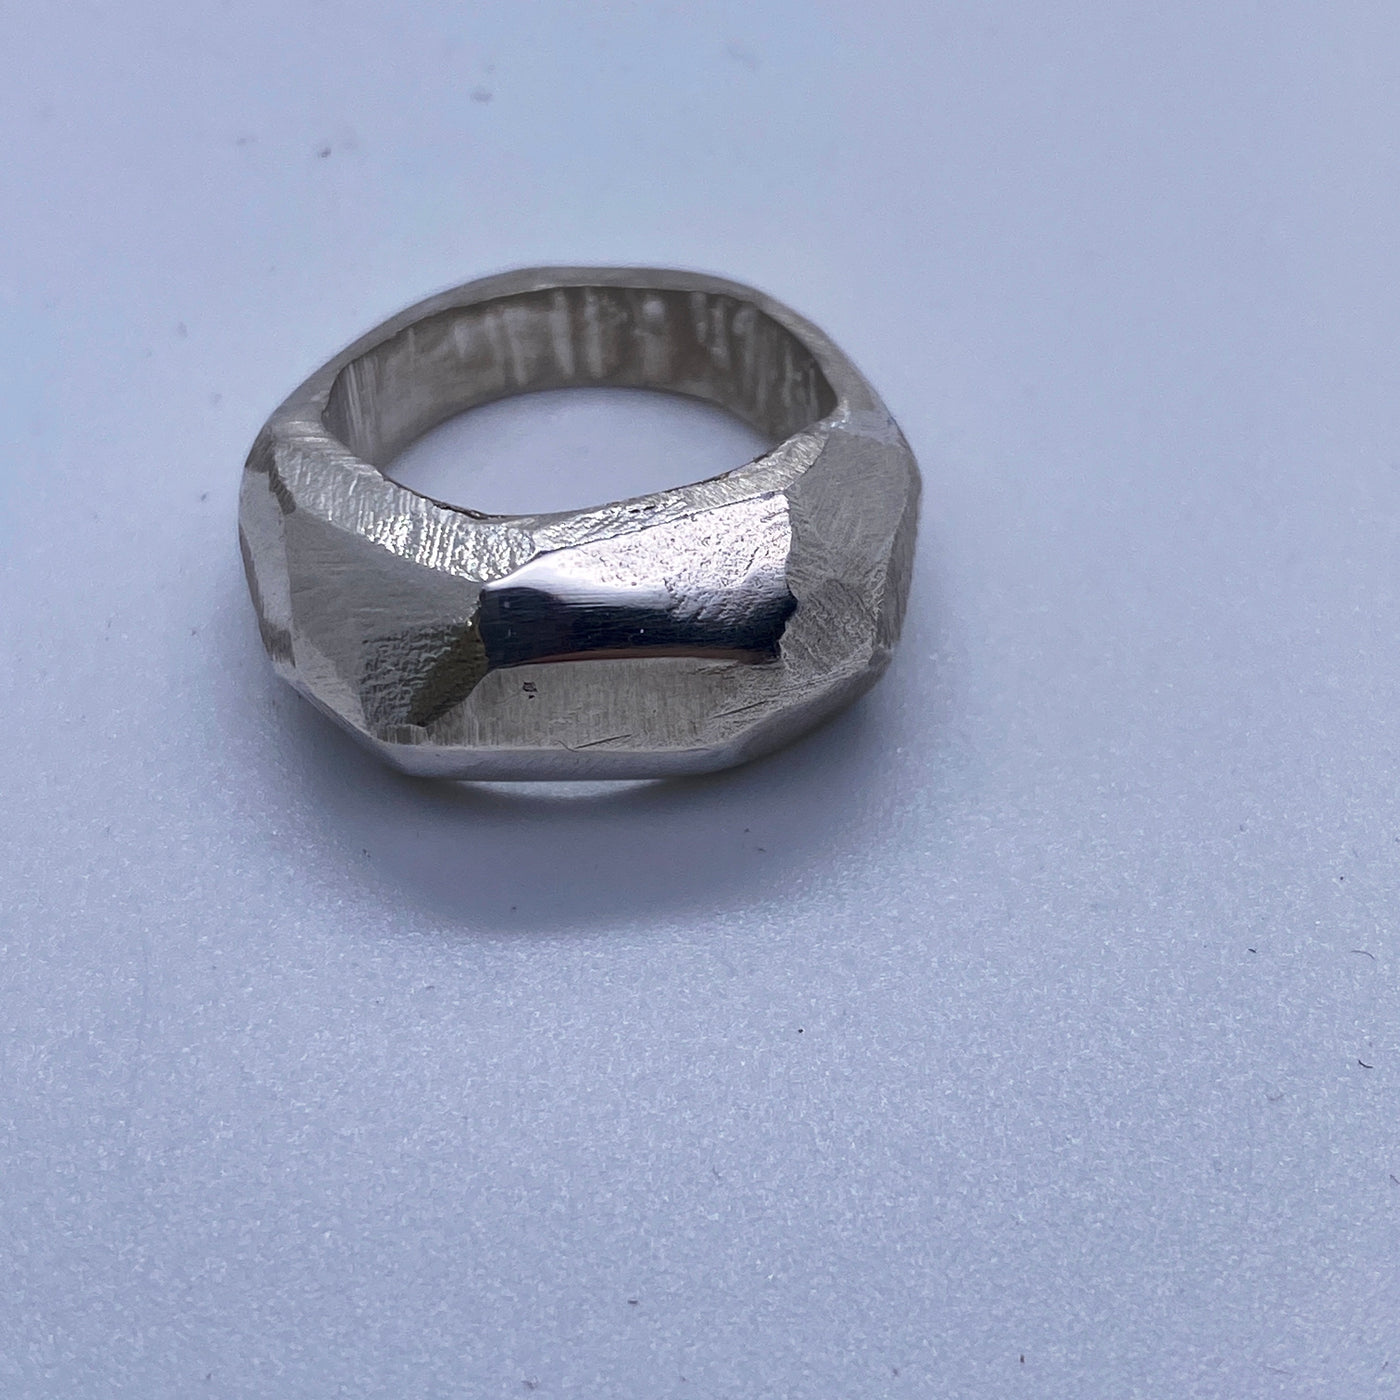 Silver multiphaces ring size 5 (49)